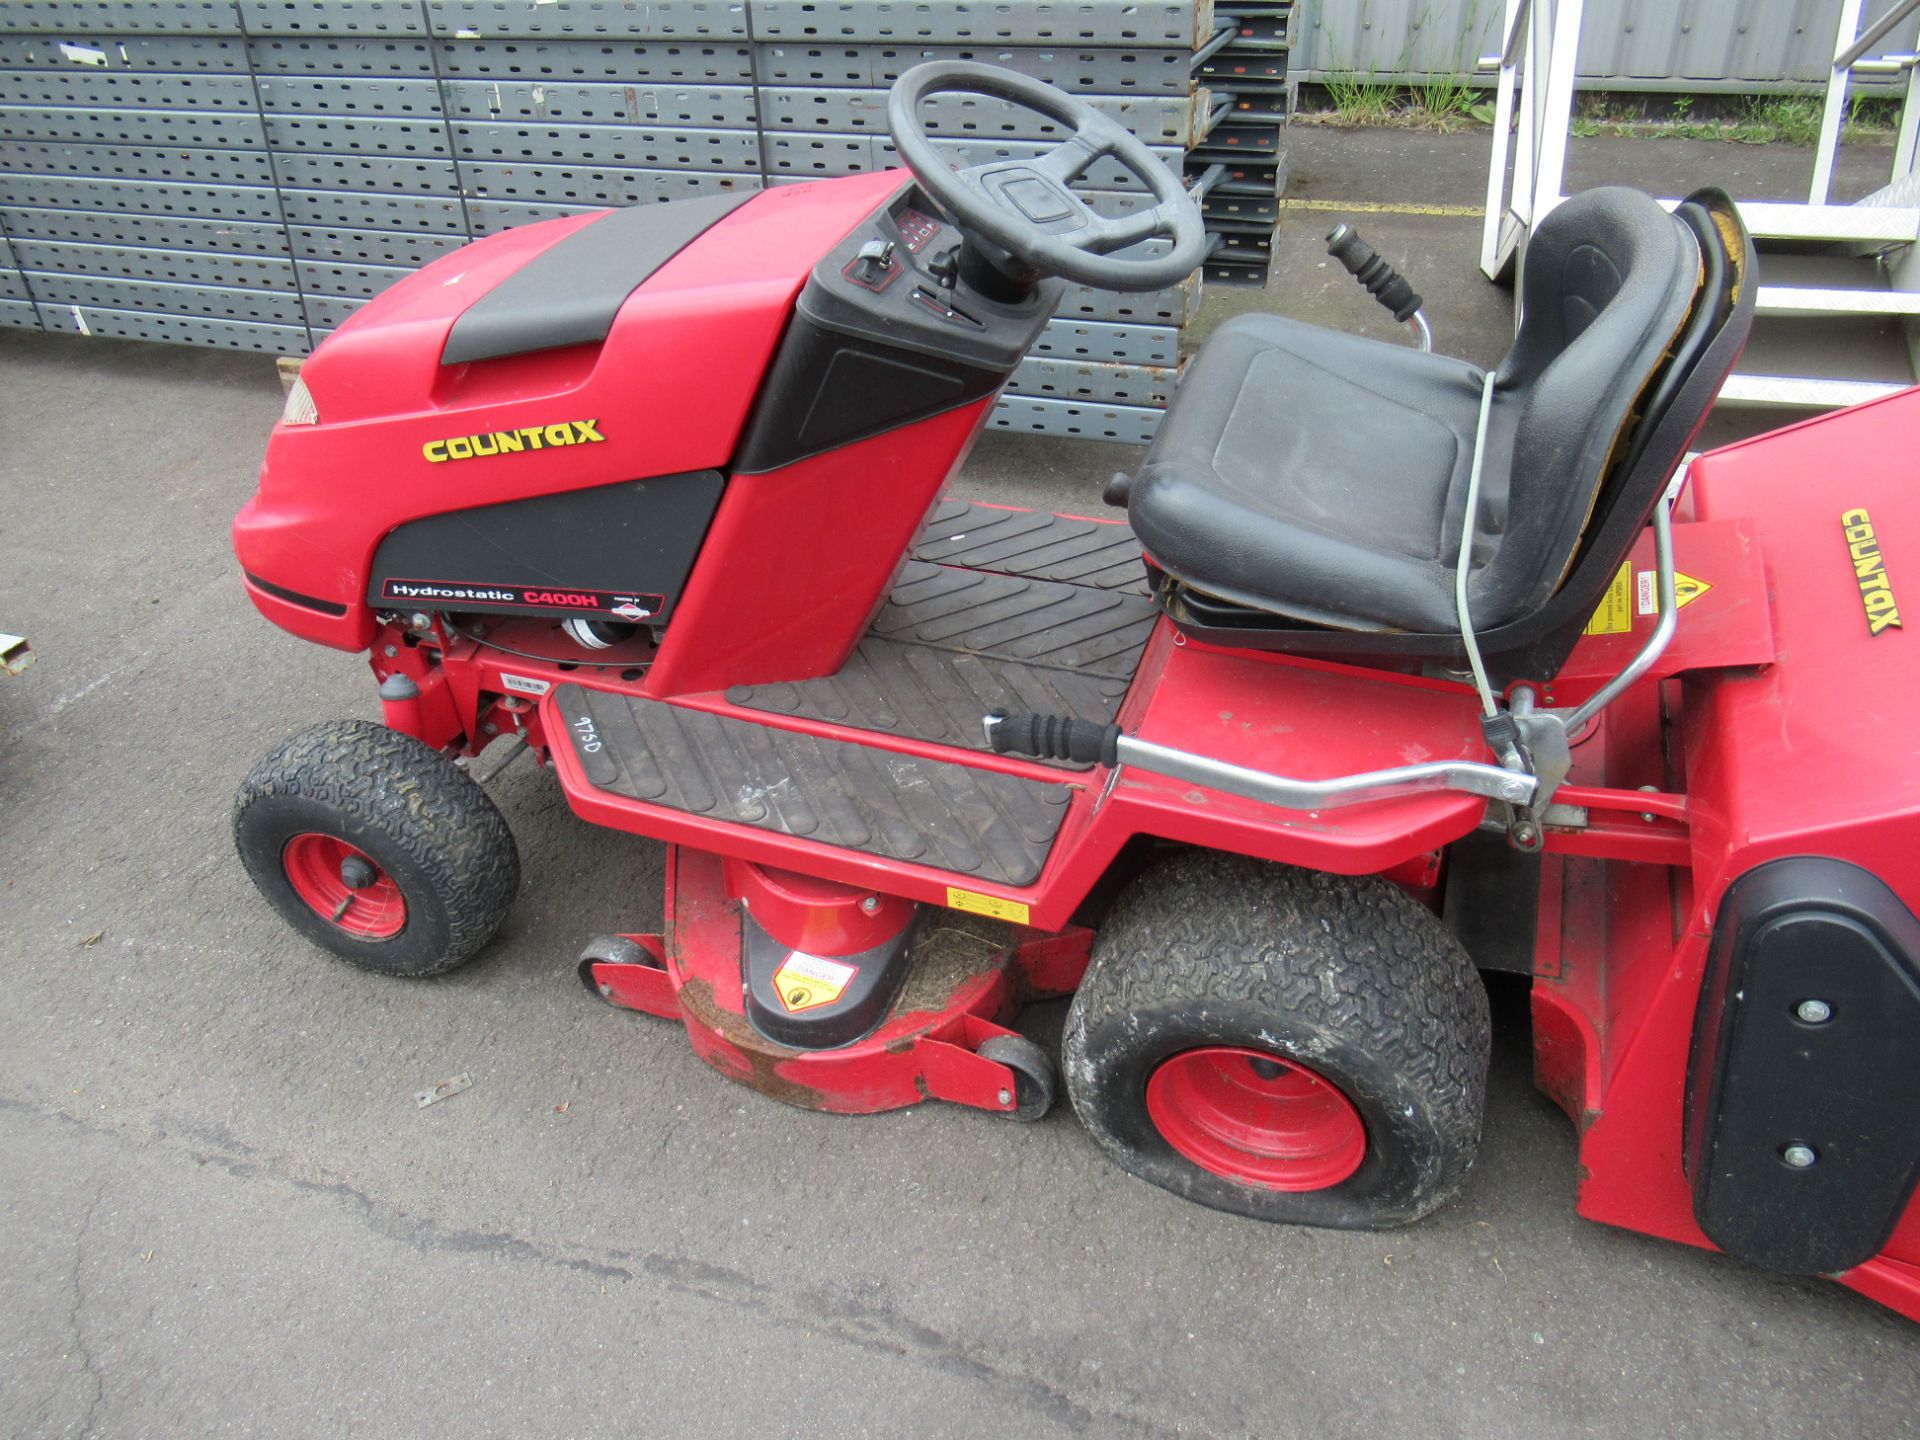 Countax Hydrostatic C400H Ride-On Lawnmower - Image 2 of 10